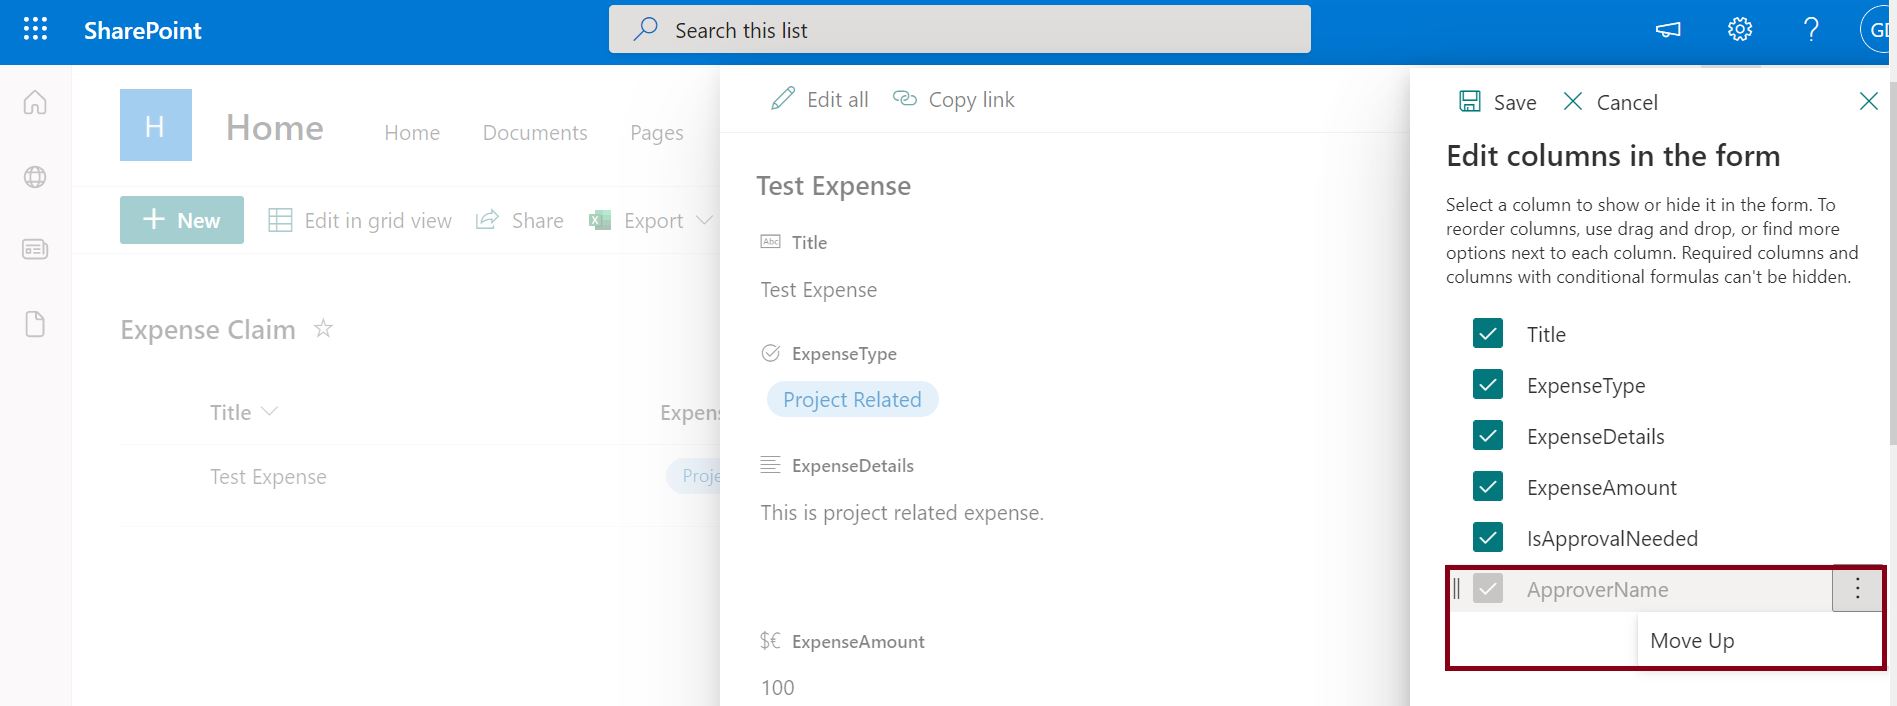 Conditionally show or hide columns in a SharePoint list, Edit conditional formula in modern SharePoint Online list is hidden when the column is required